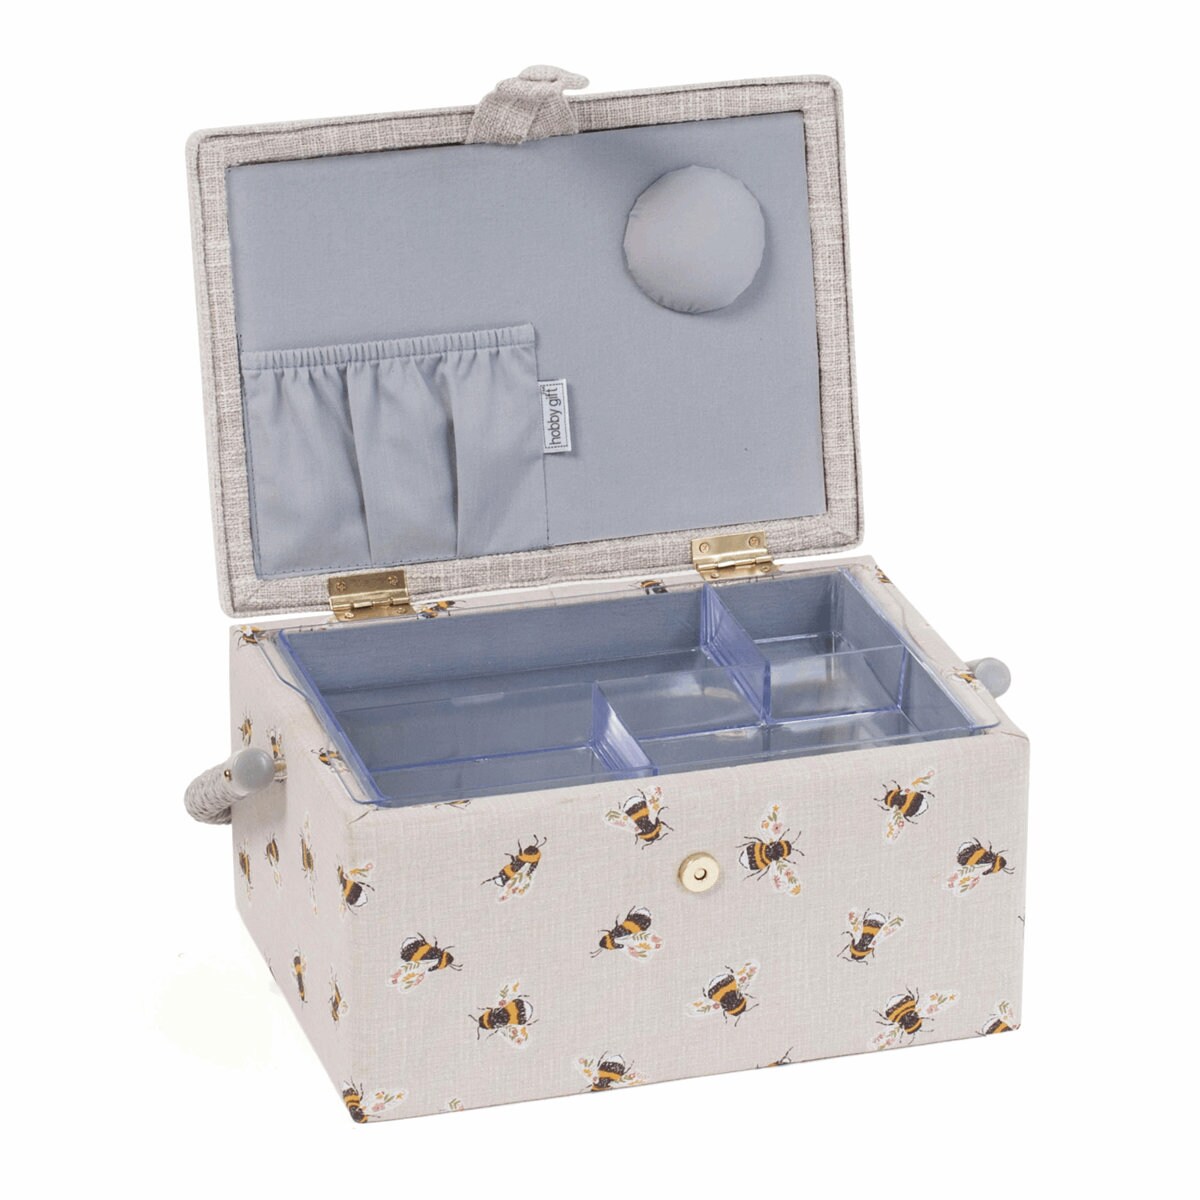 Blue 24 x 16 x 11 cm Hobbygift This Sewing Box Store Your Threads Needles and Other Accessories in a Convenient Compact Way 